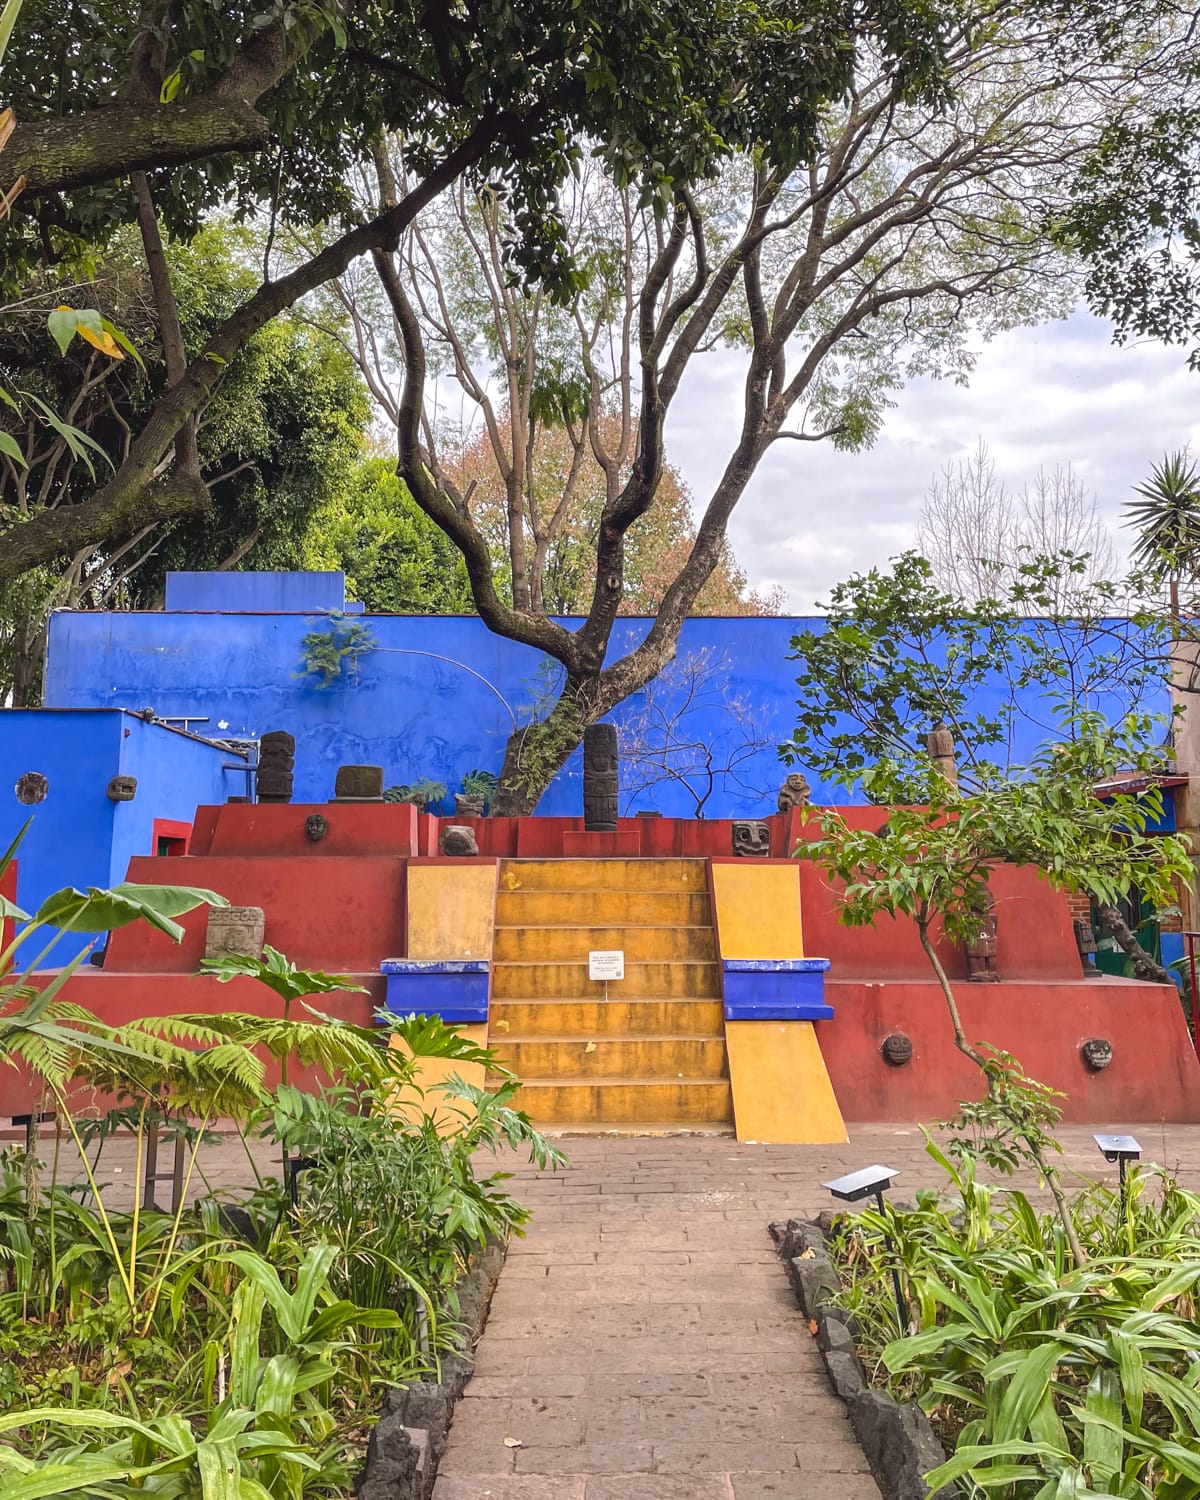 33 Unique Things to Do in Mexico City